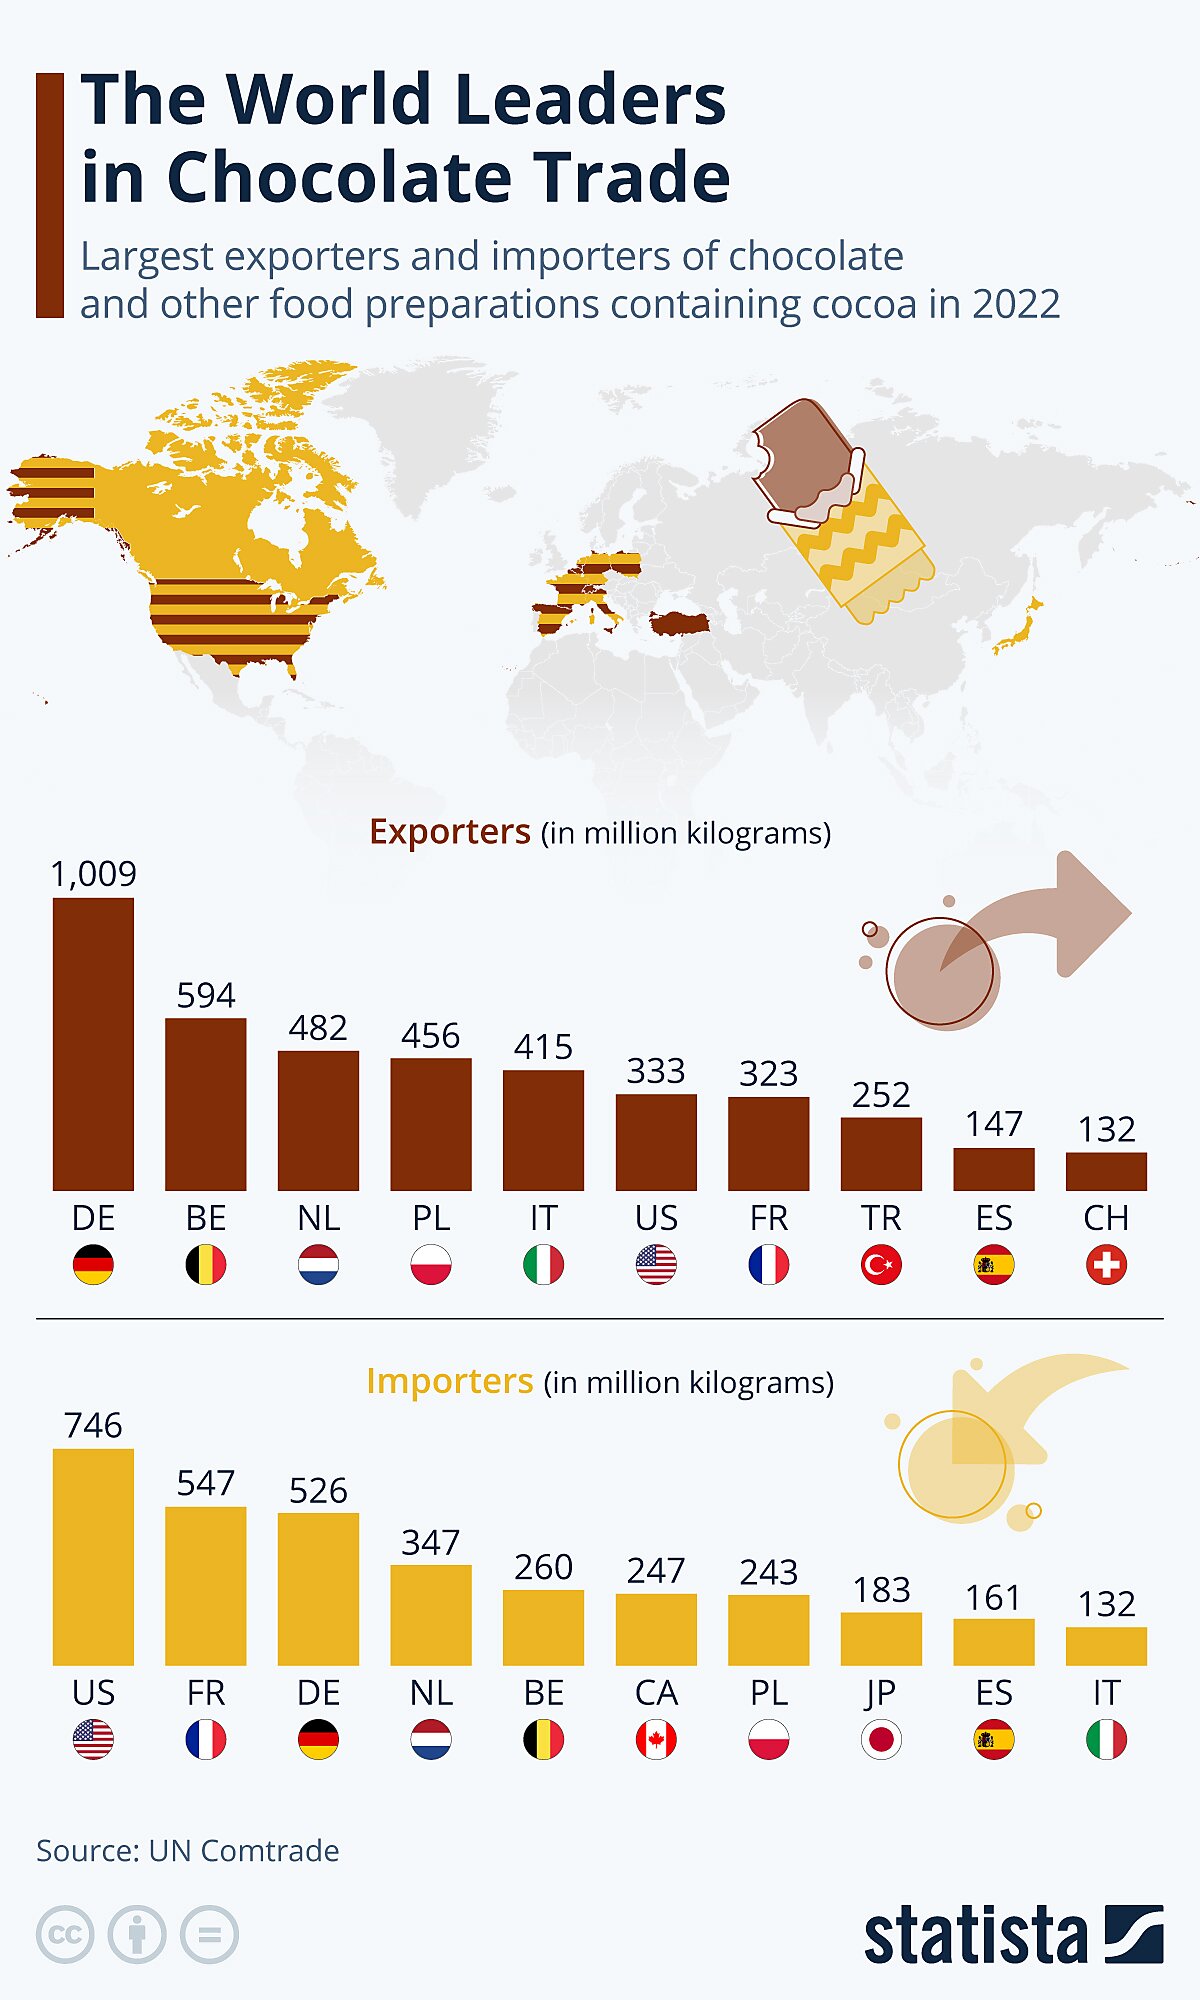 The world leaders in chocolate trade; the top exporters are also some of the top importers.